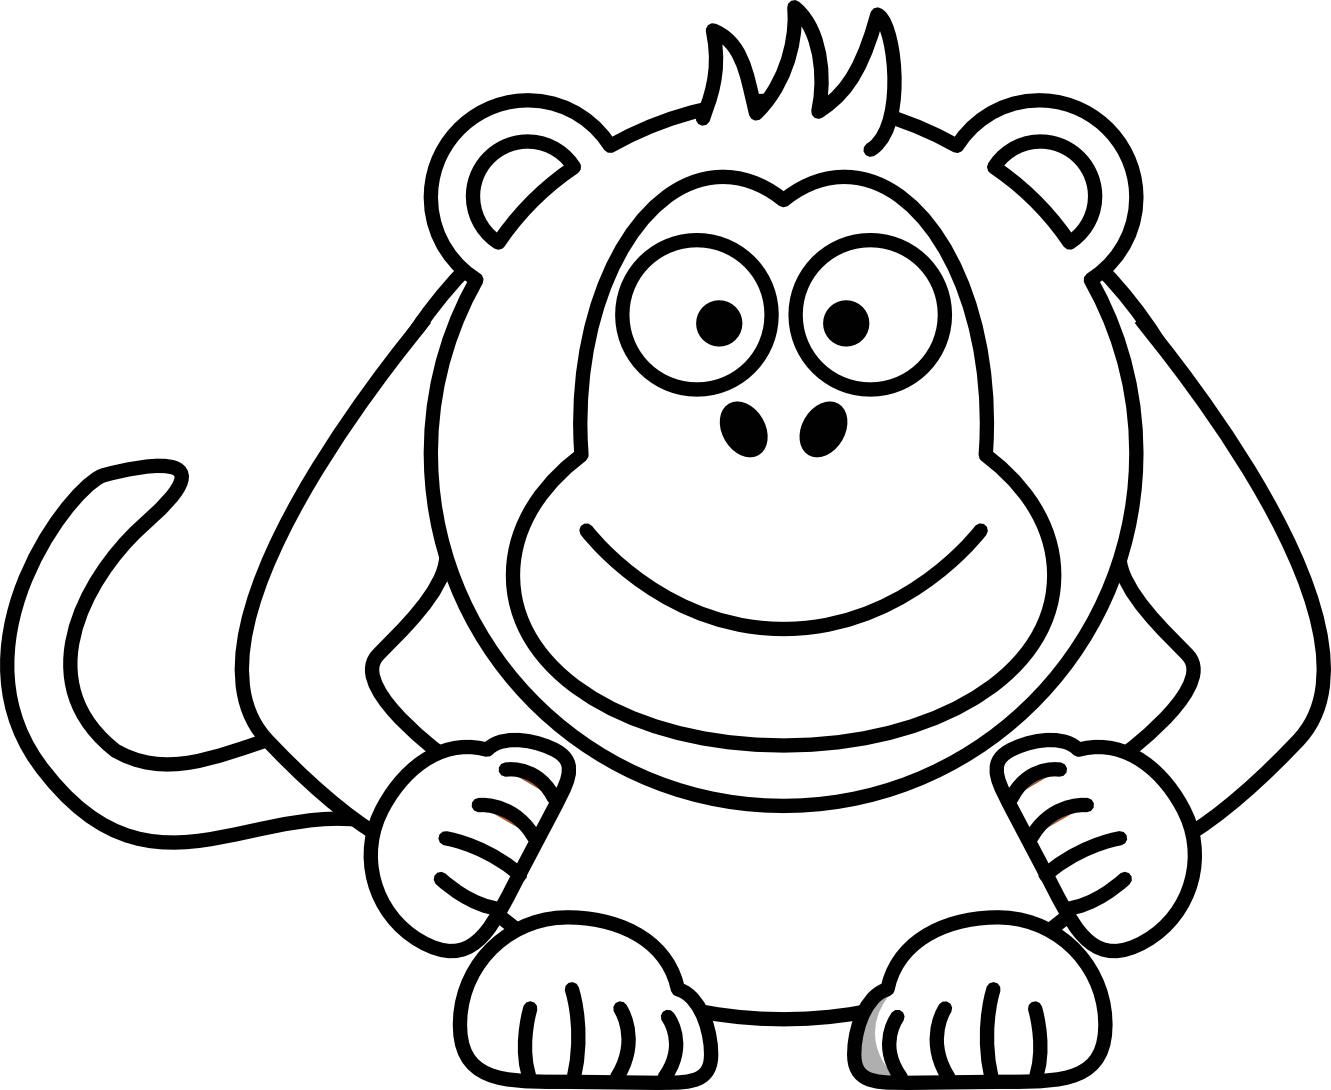 Cartoon Monkey Coloring Page Colouring Sheet - ClipArt Best ...